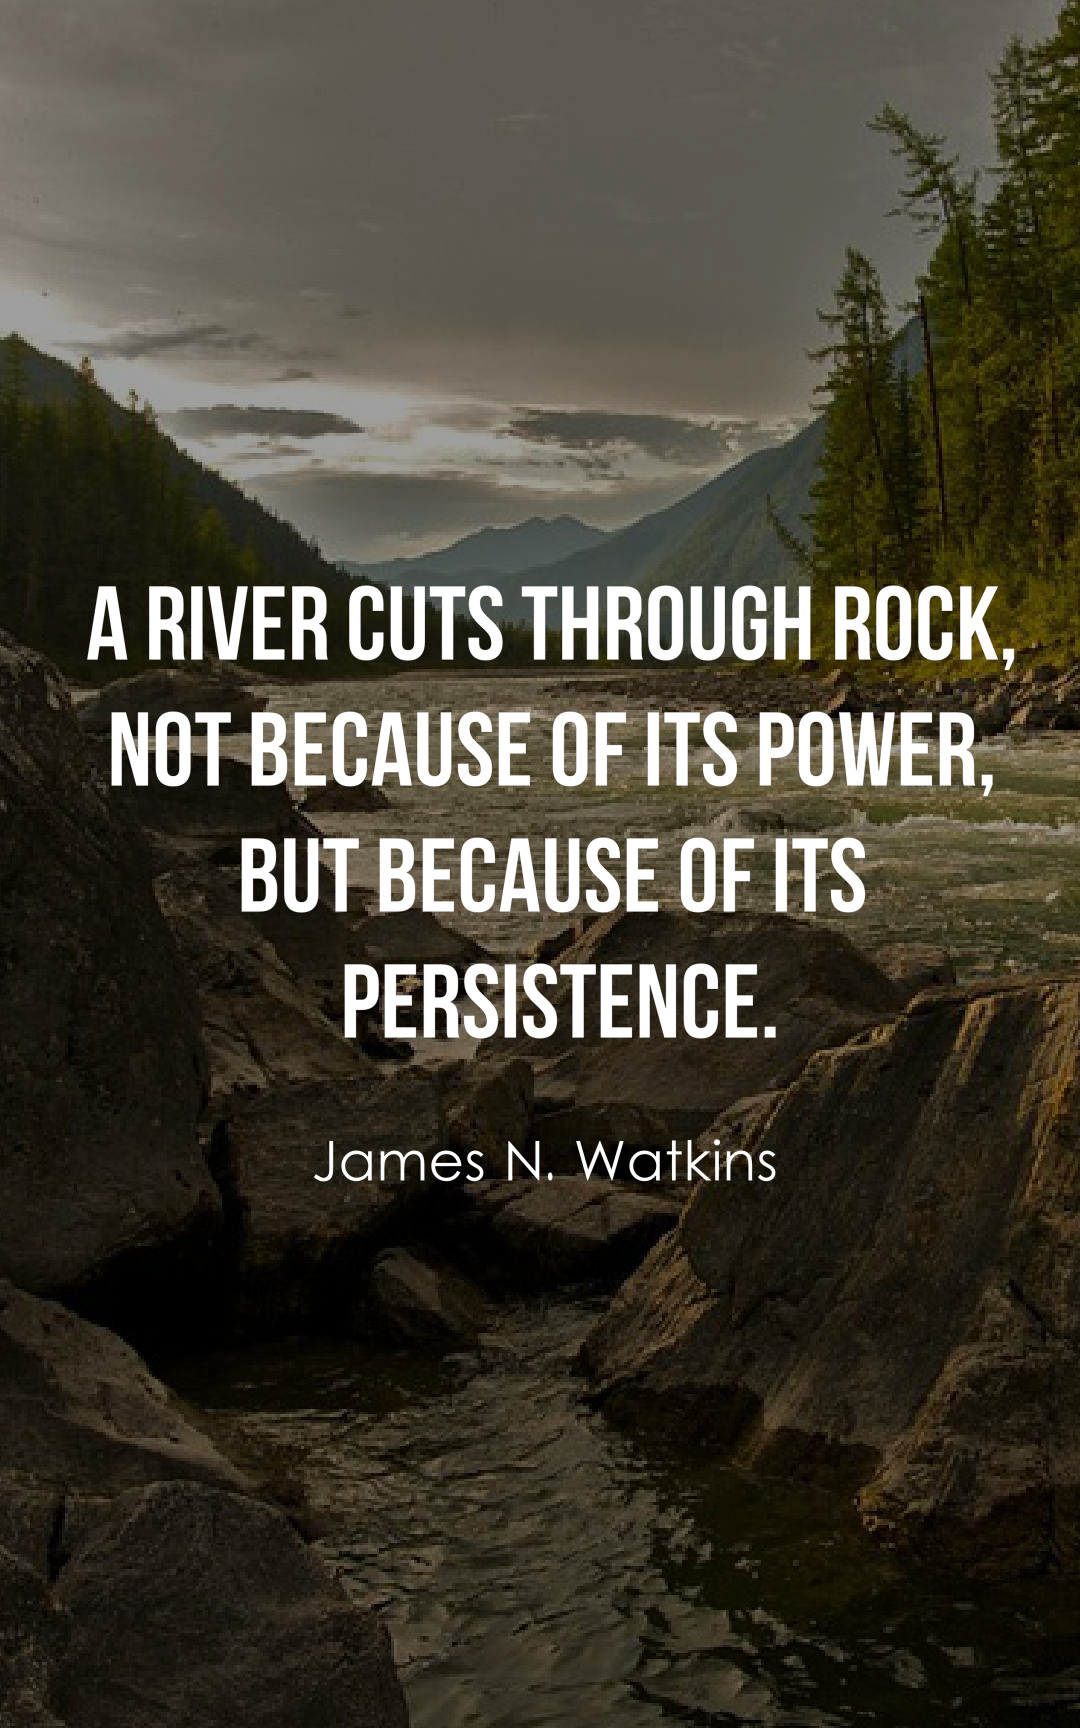 Inspirational Positive Quotes
 20 Inspirational River Quotes And Sayings